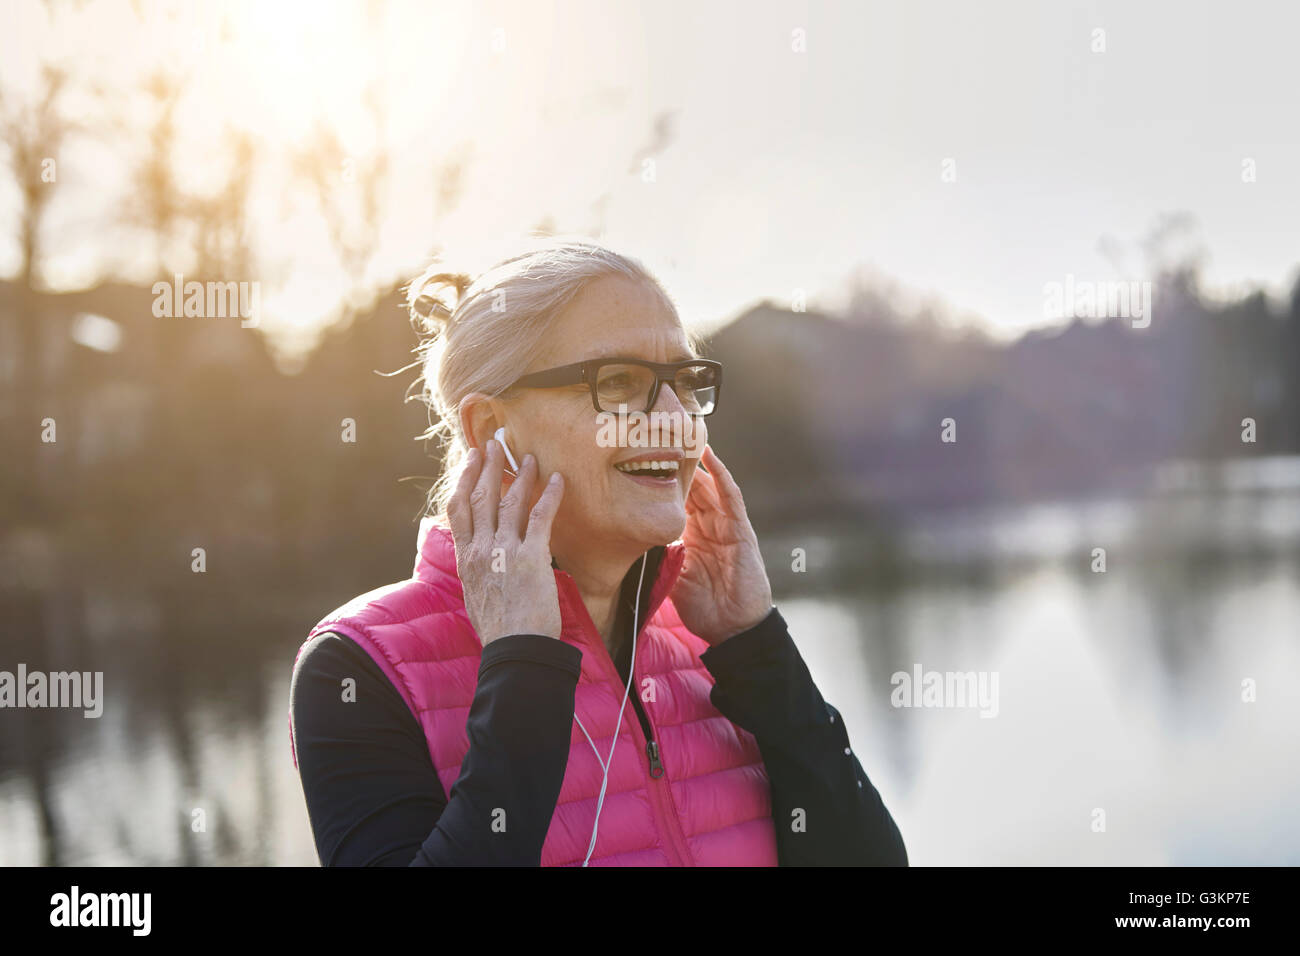 Woman wearing glasses and earbuds, hands on ears looking away smiling Stock Photo